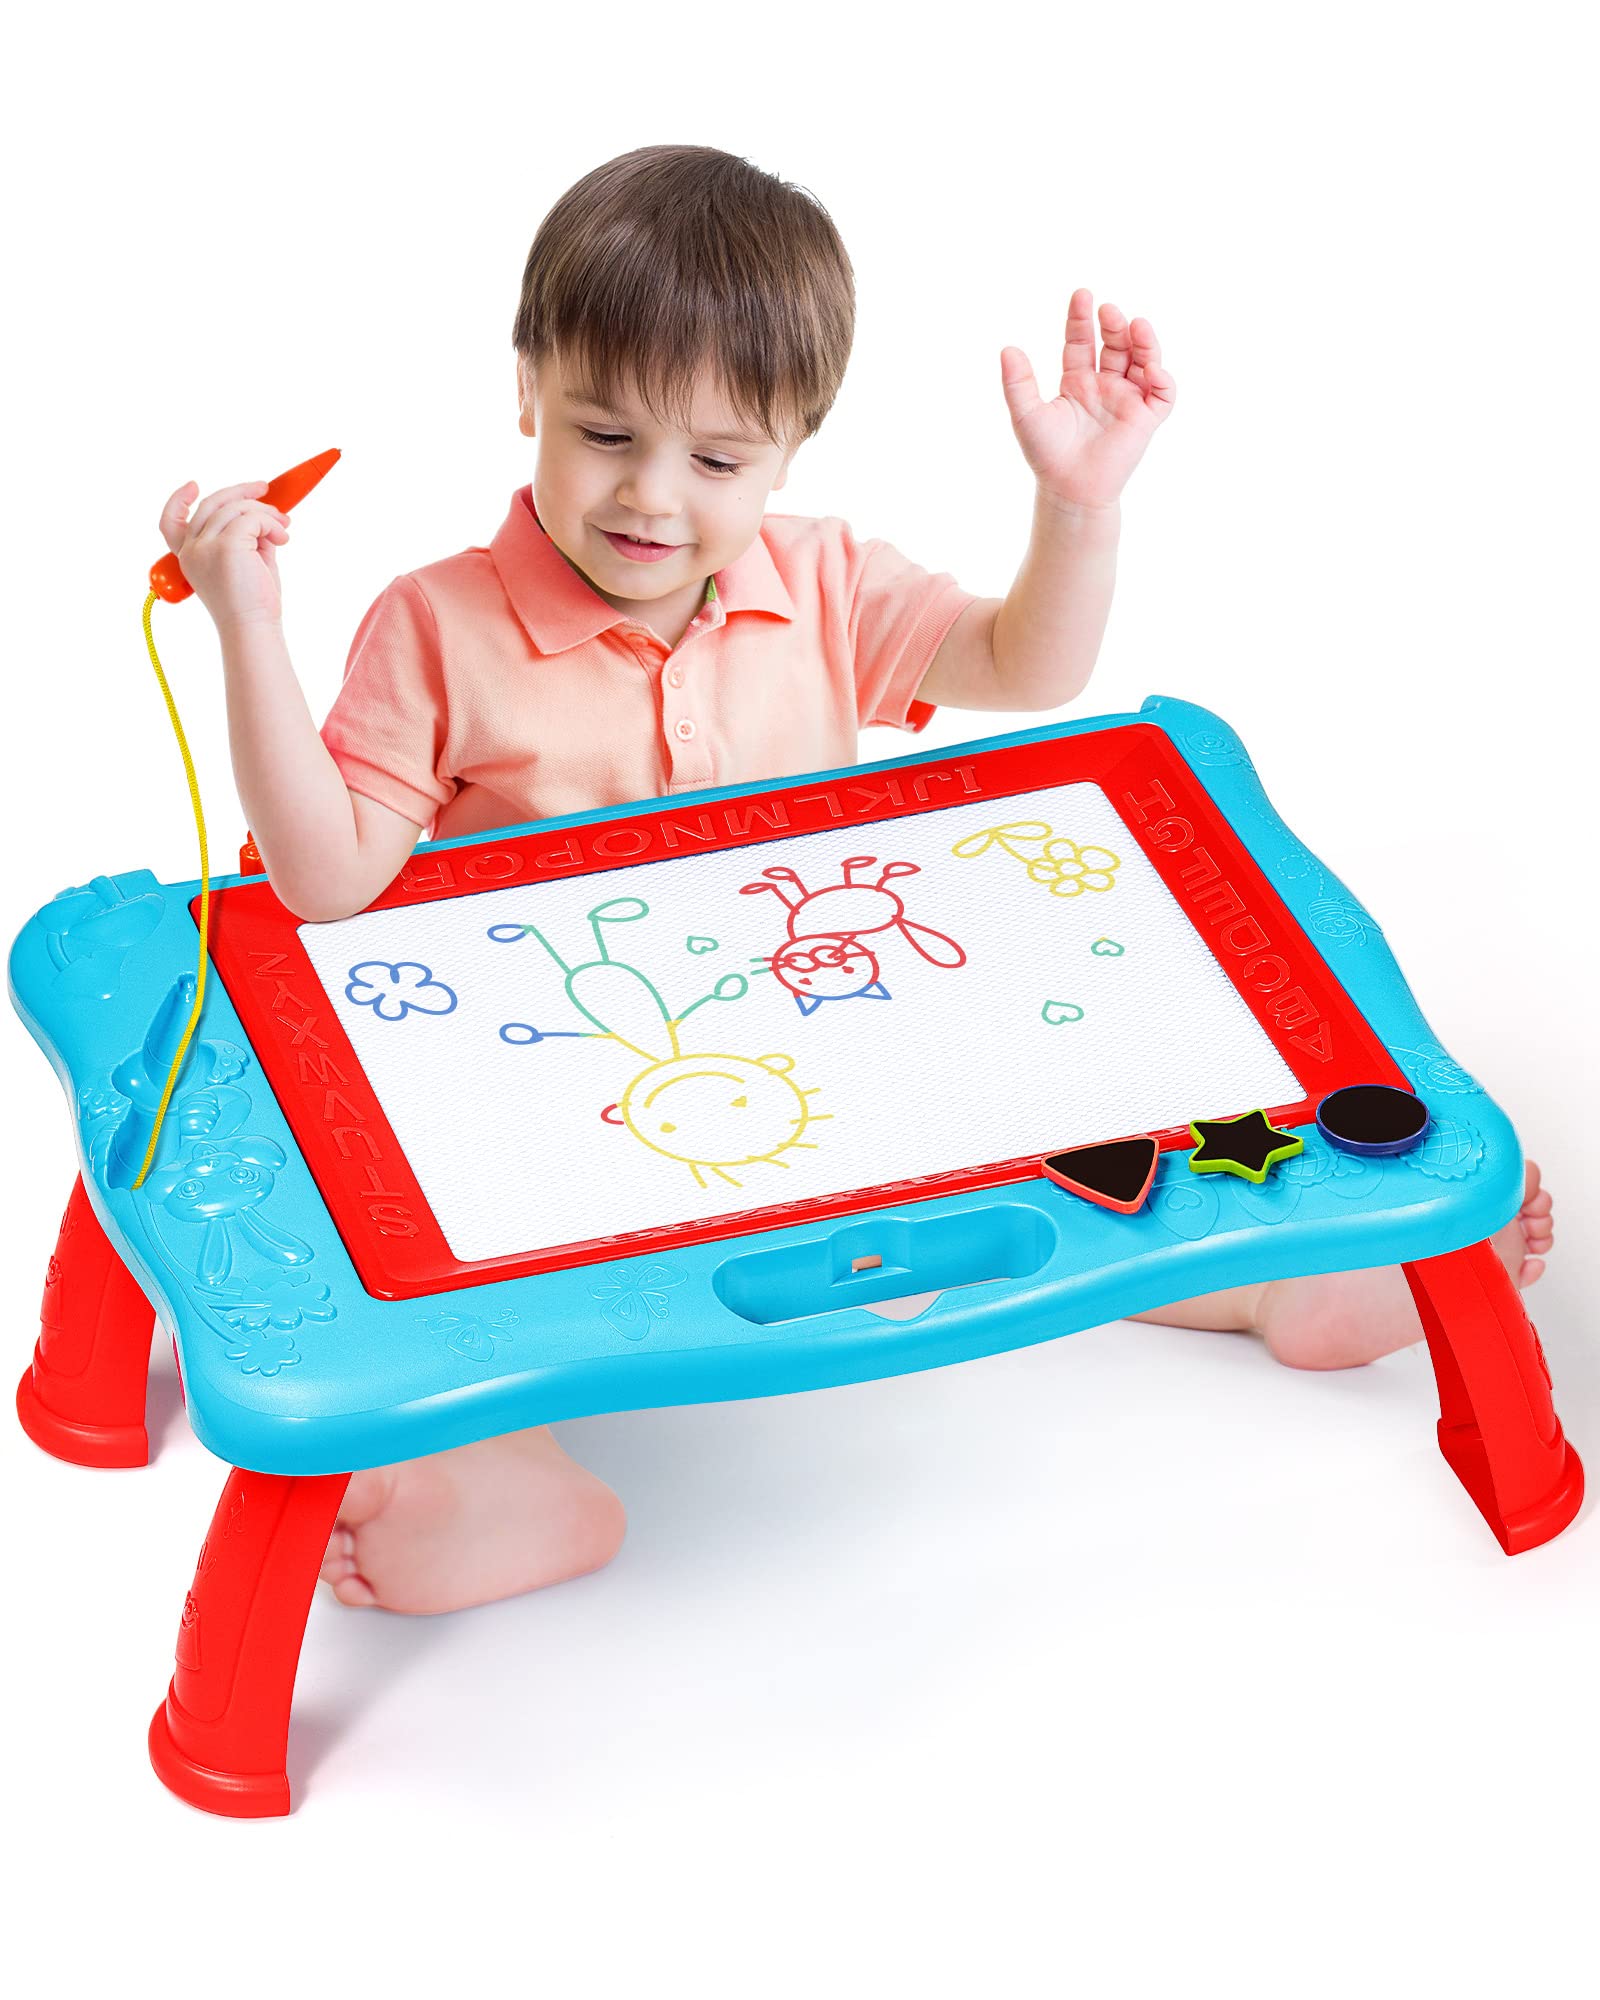 Gamenote Large Magnetic Drawing Board with Detachable Legs, Doodle Board Toy Writing Painting Sketch Pad for Kids – GAMENOTE , SKU-B09Q8FQZTF – go.isclix.com/deep_link/5490542209468627421?url=https://fado.vn 🛒Top1Shop🛒 🇻🇳Top1Vietnam🇻🇳 🛍🛒 🇻🇳🇻🇳🇻🇳🛍🛒